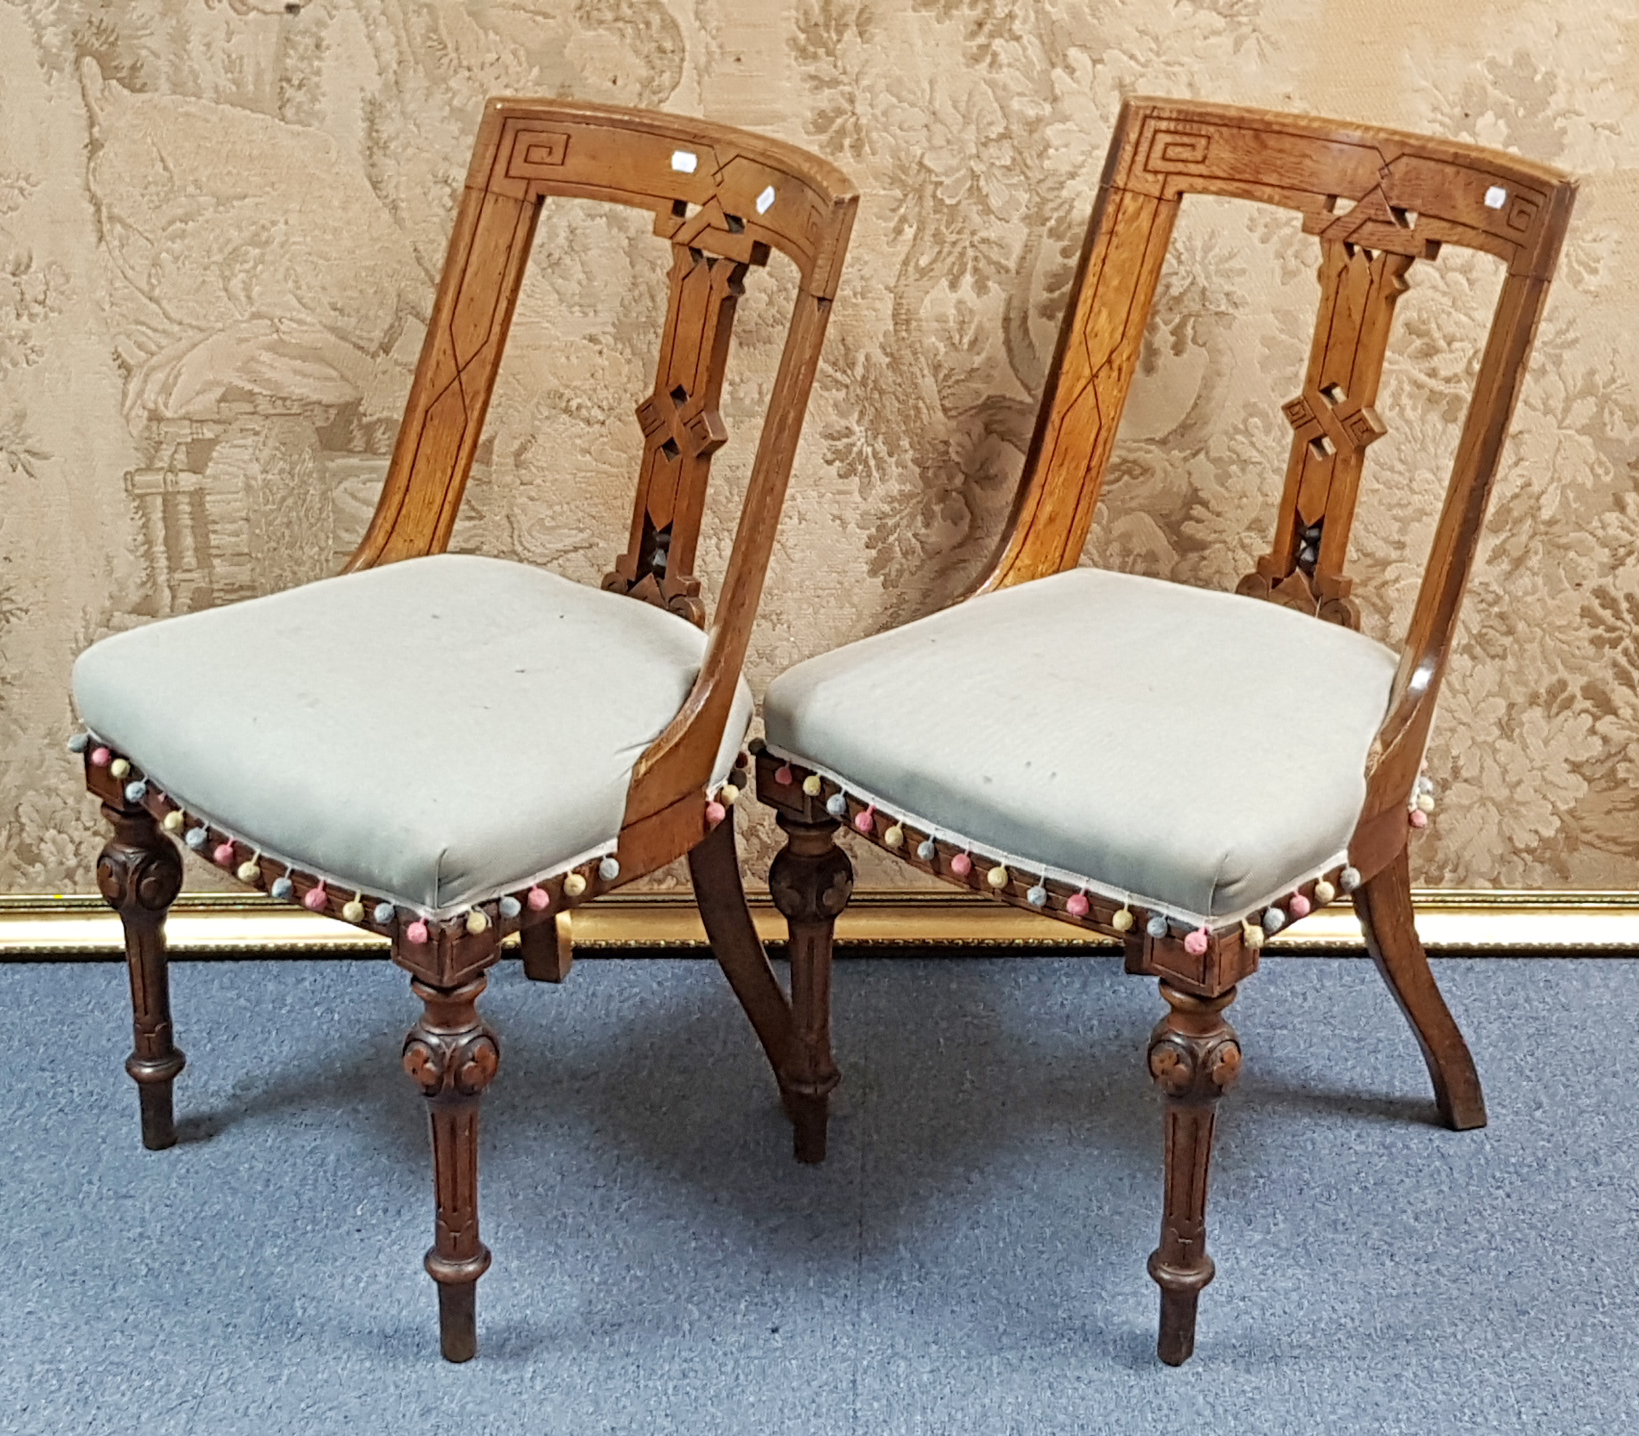 A set of six late Victorian carved oak Athenian-style dining chairs with pierced splat backs, padded